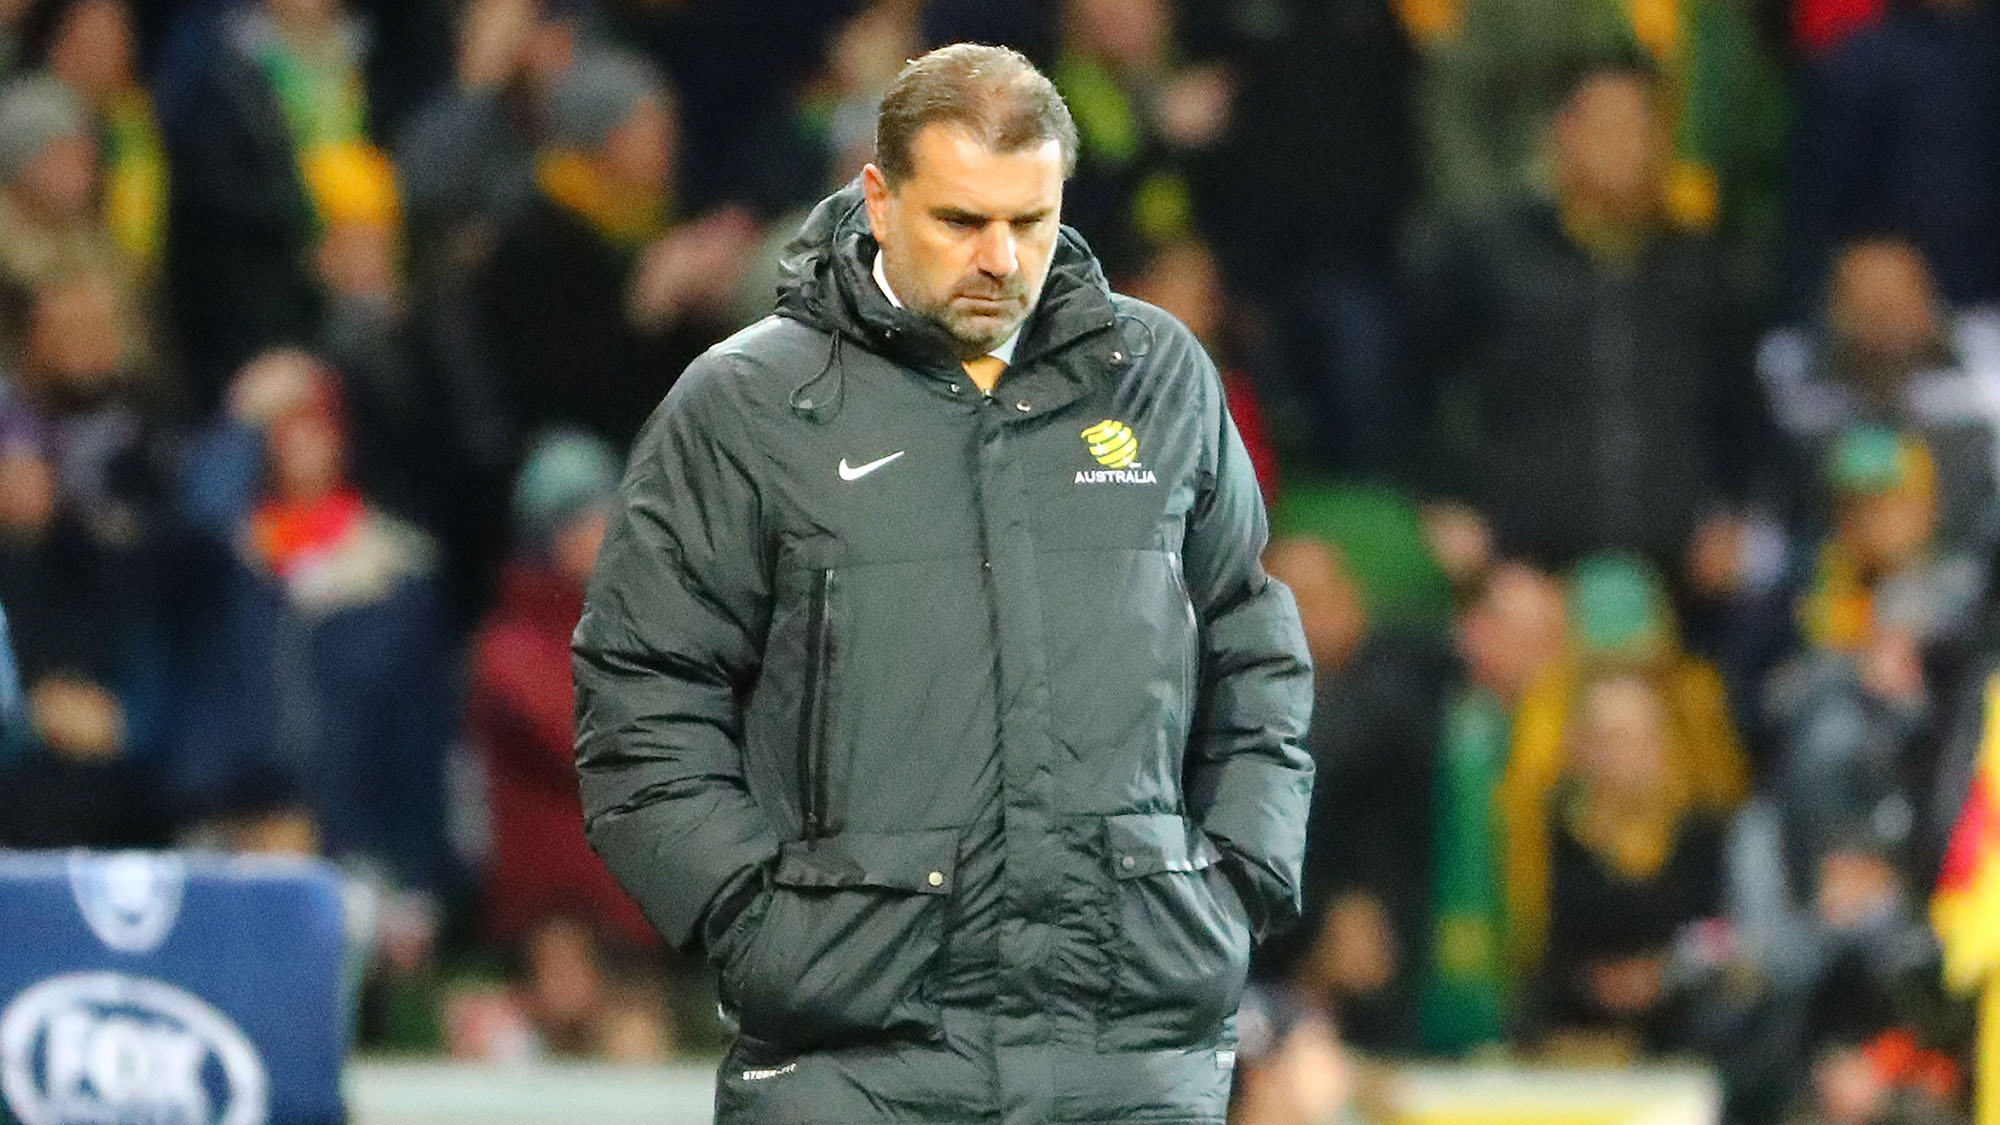 Ange Postecoglou to quit Socceroos job after World Cup playoff